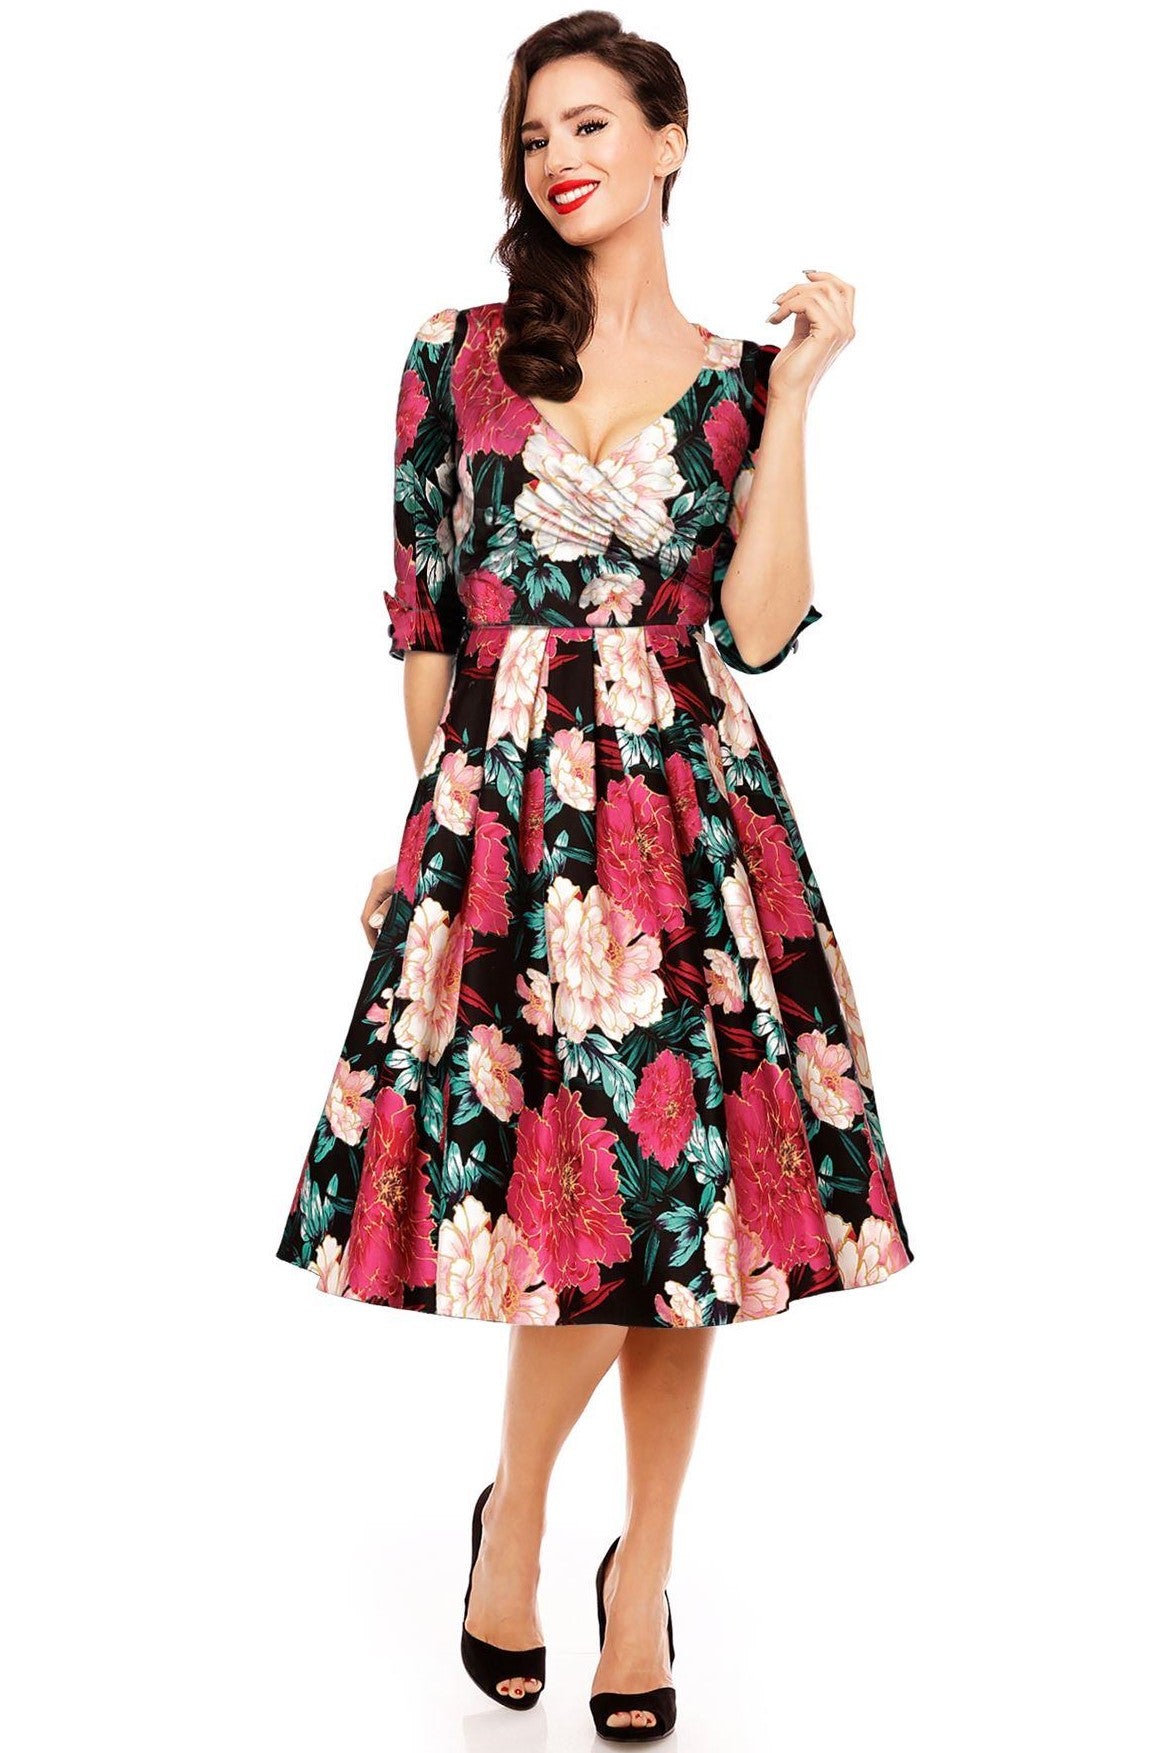 Long Sleeve 50s Swing Dress in Black-Pink-Gold Floral